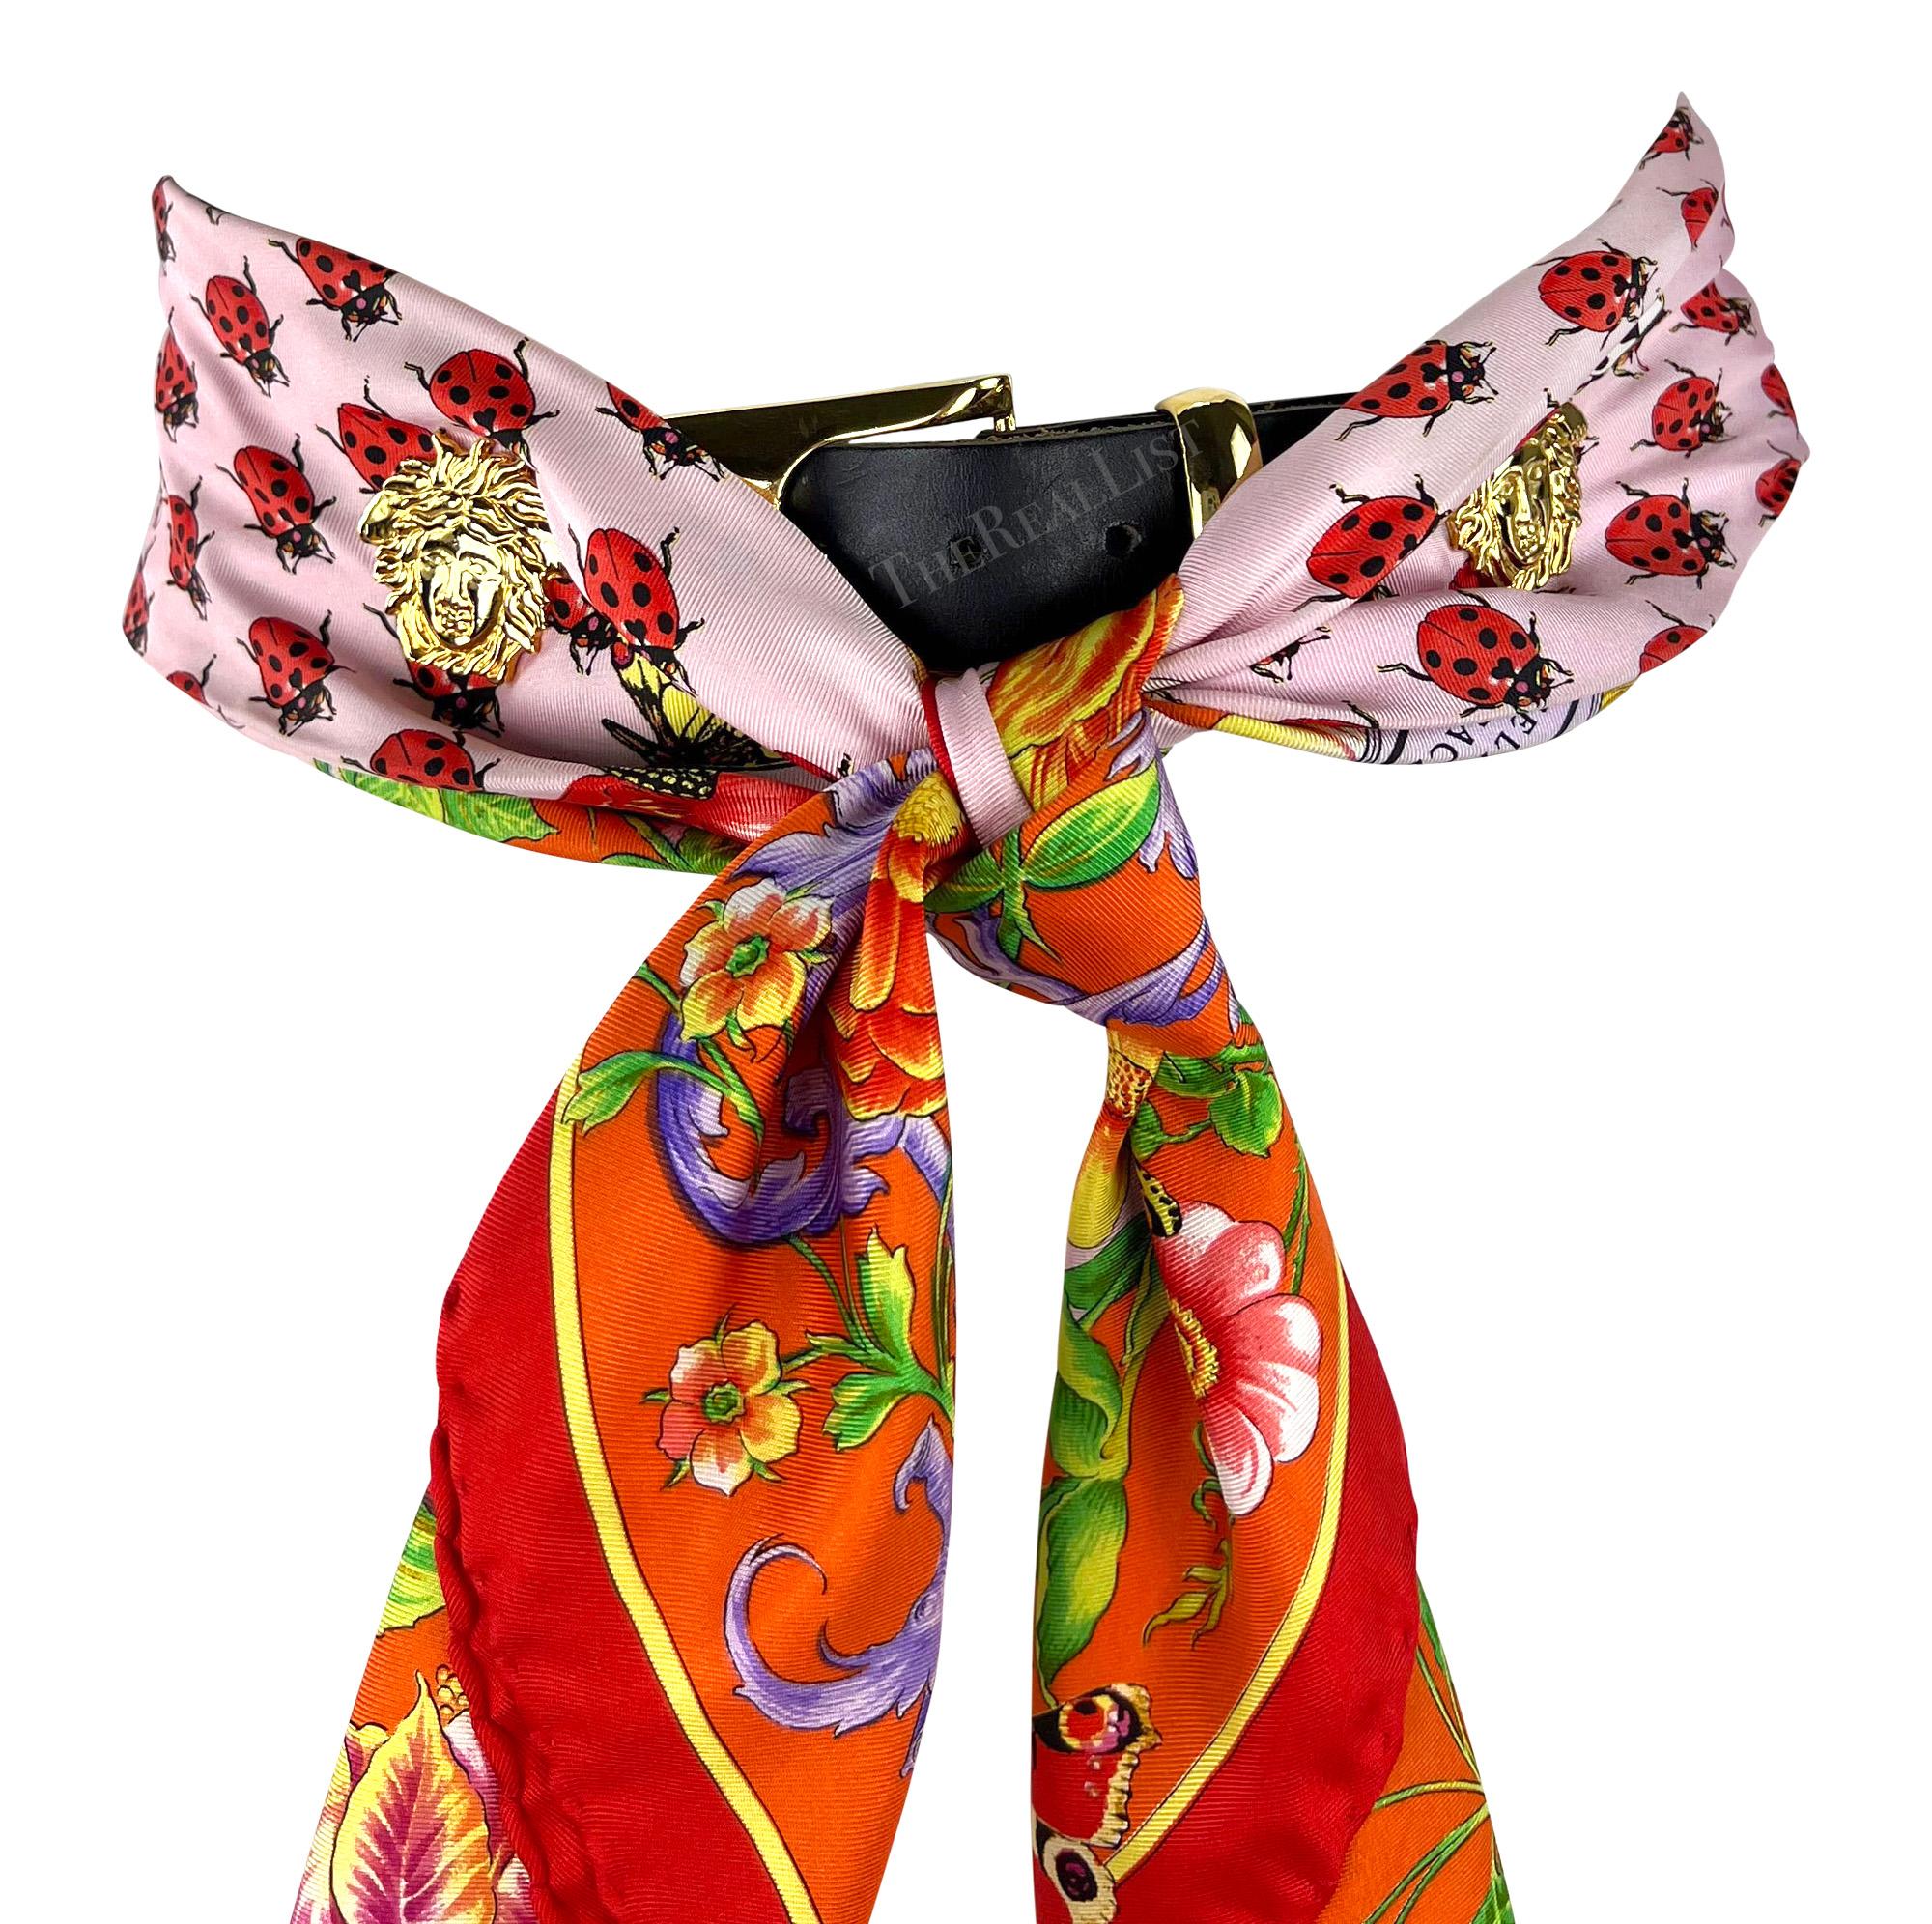 This pink scarf belt from Gianni Versace's Spring/Summer 1995 collection is crafted from silk and features a playful ladybug print. It includes large Versace Medusa medallions for decoration and a gold-tone buckle. The pink silk is covered with an